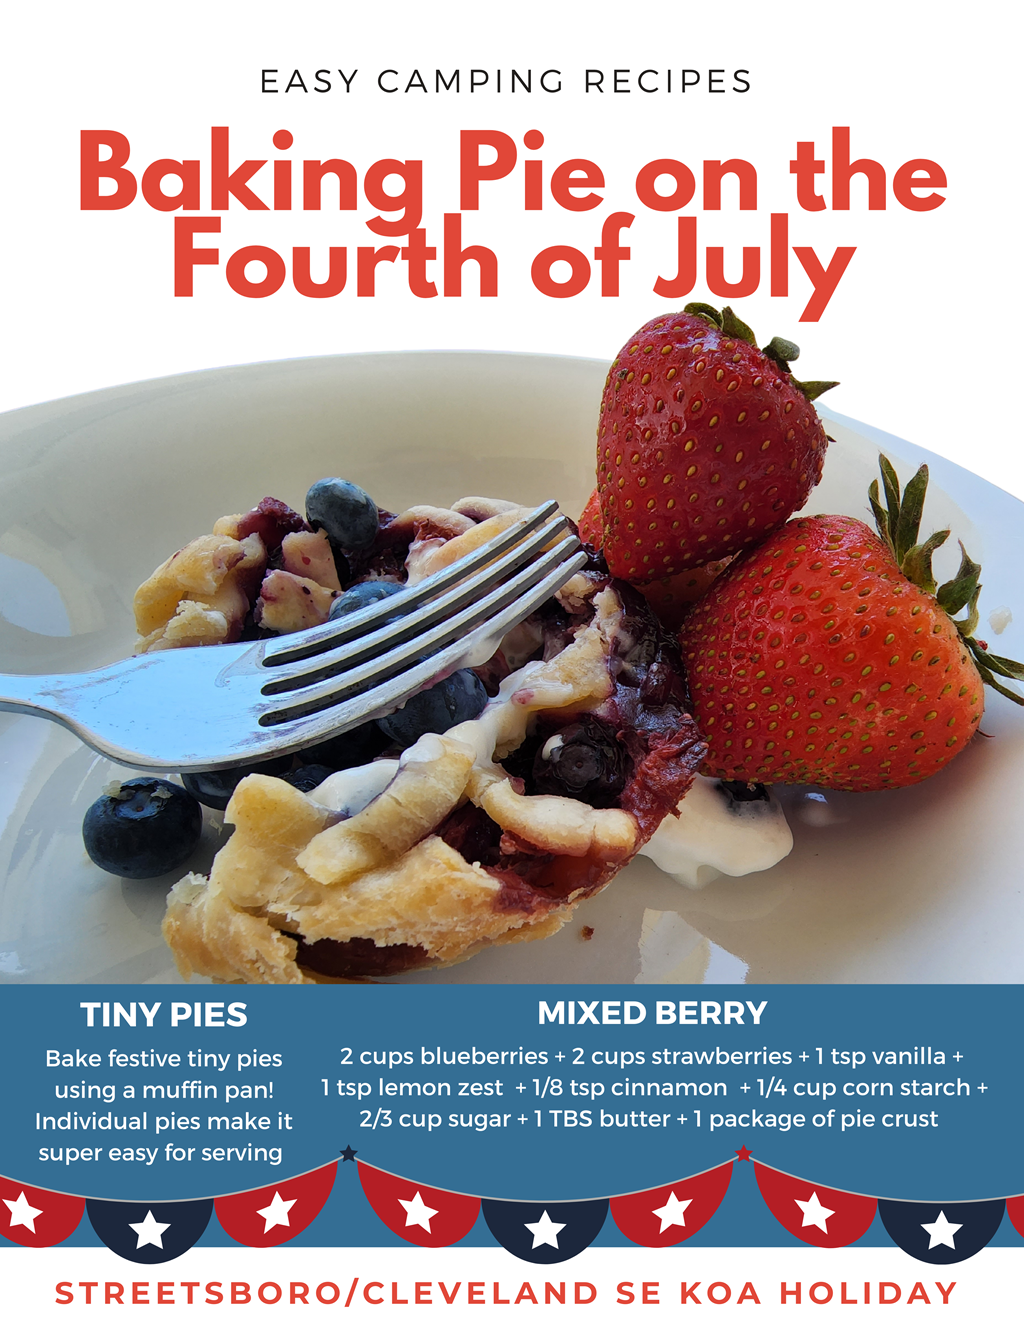 Baking Pie on the Fourth of July